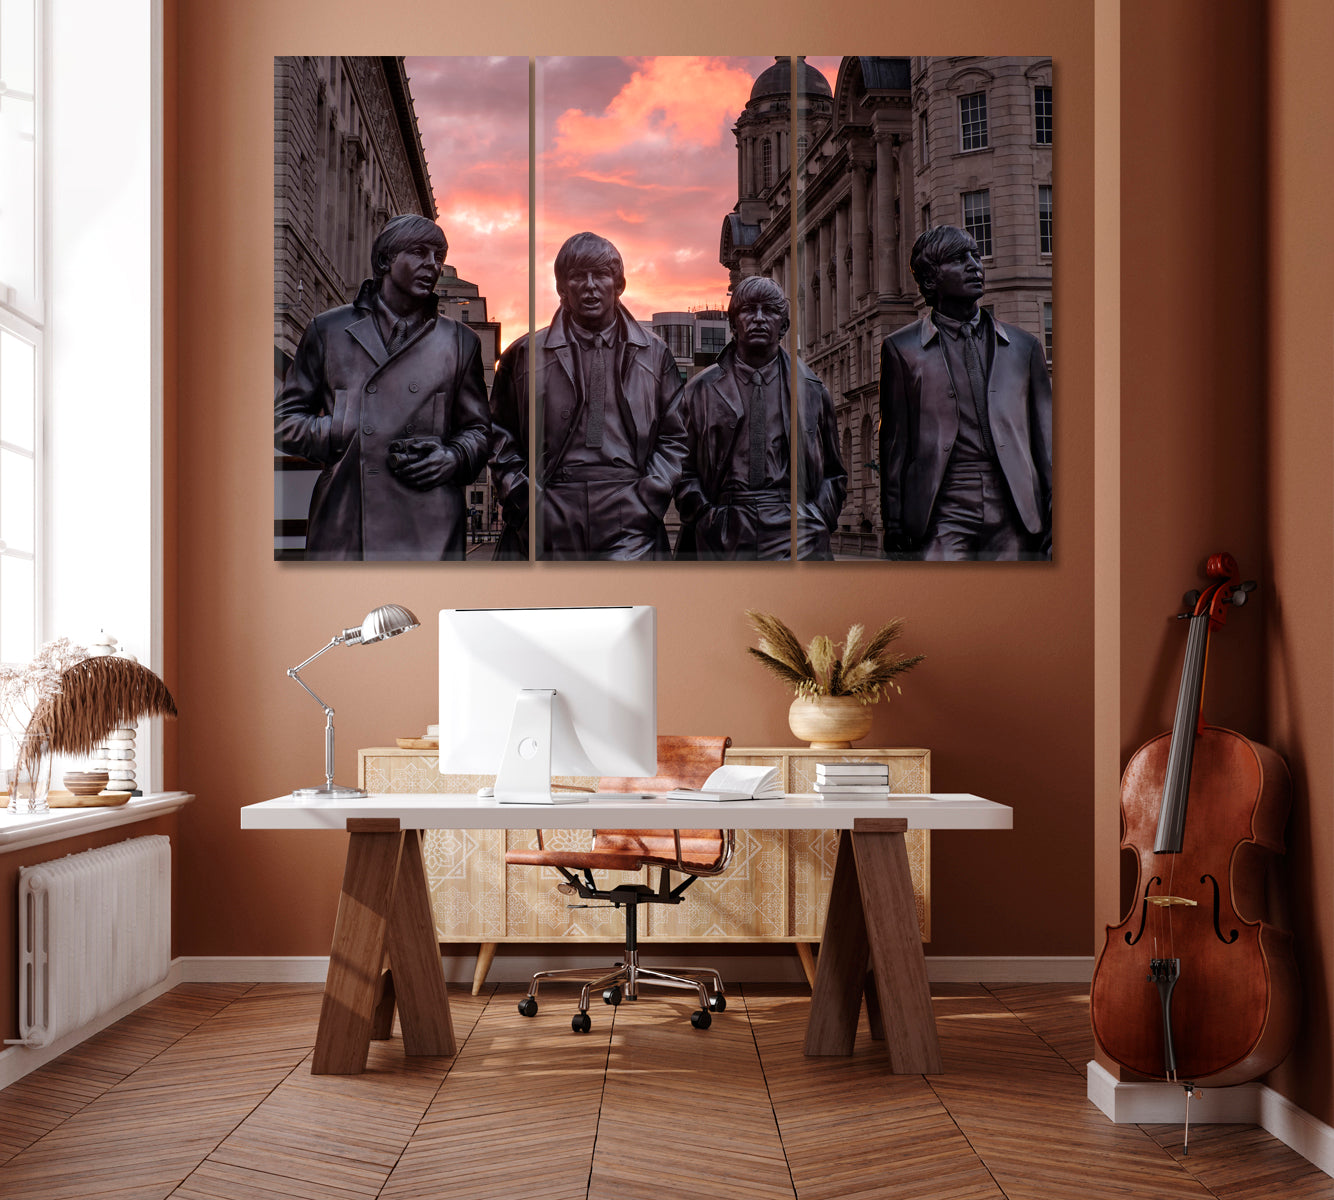 Statue of The Beatles Liverpool Canvas Print ArtLexy 3 Panels 36"x24" inches 